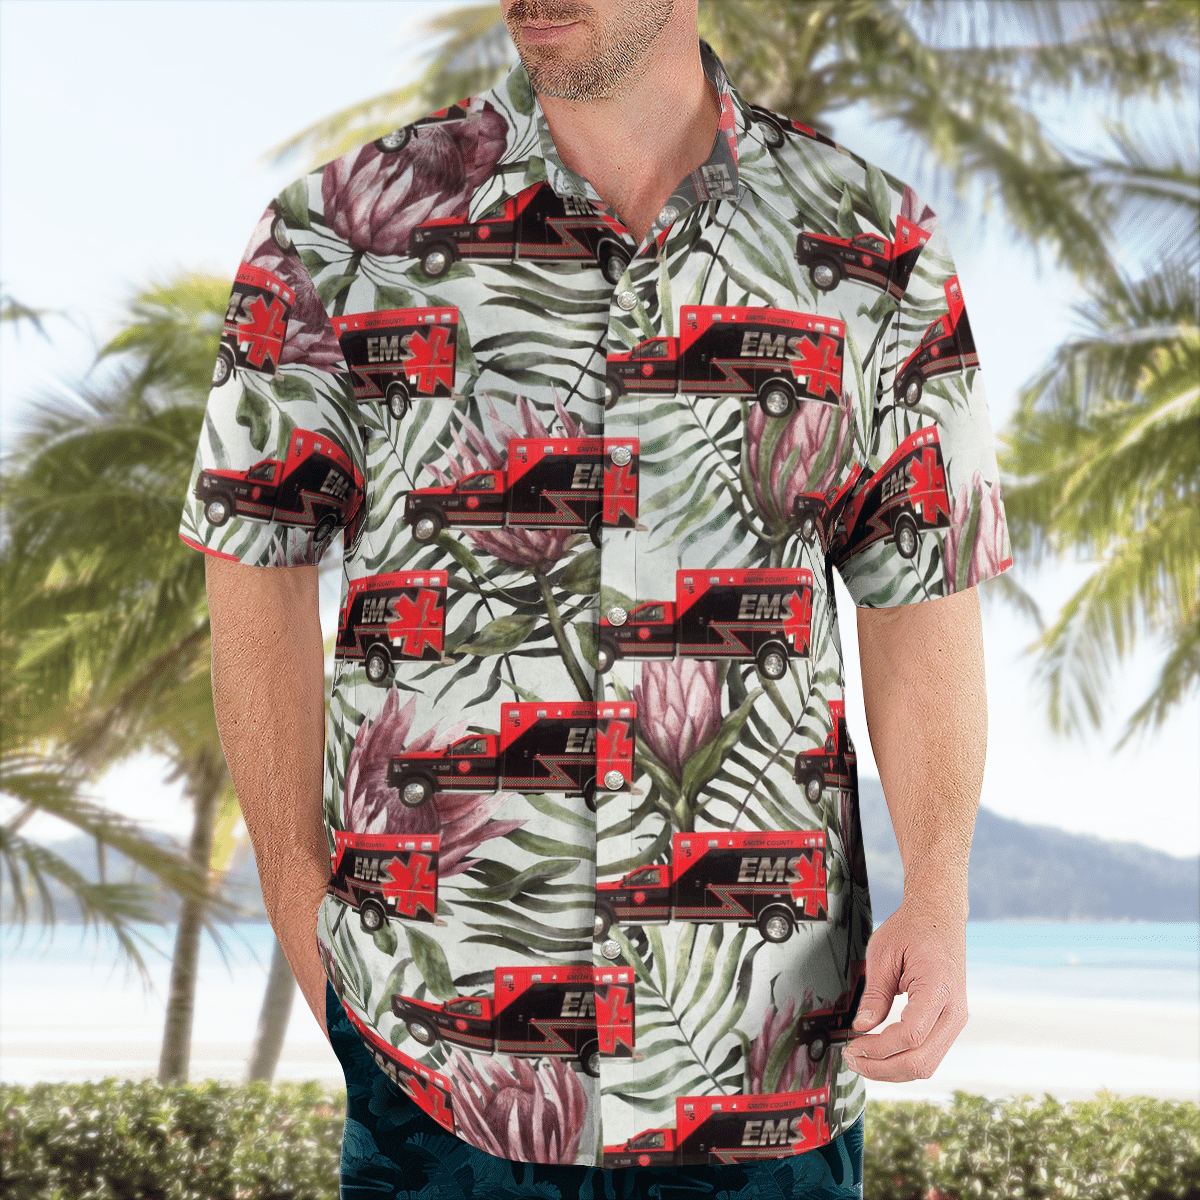 Top Hawaiian fashions that will give you a good look 8